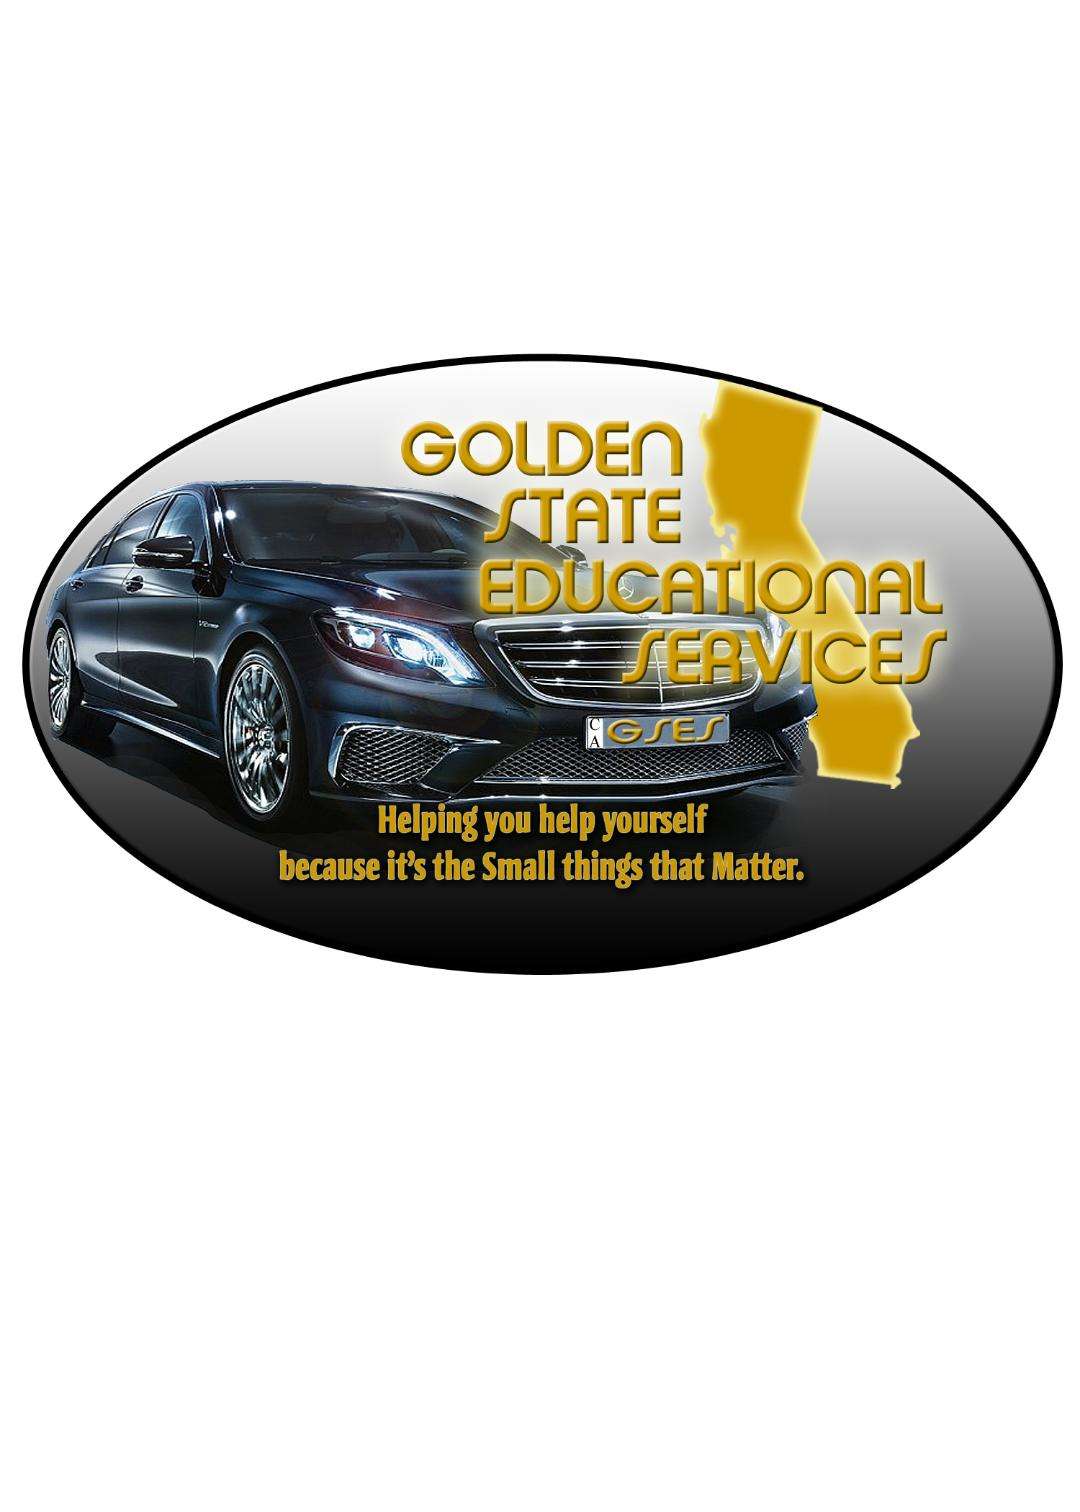 Golden State Educational Services Logo